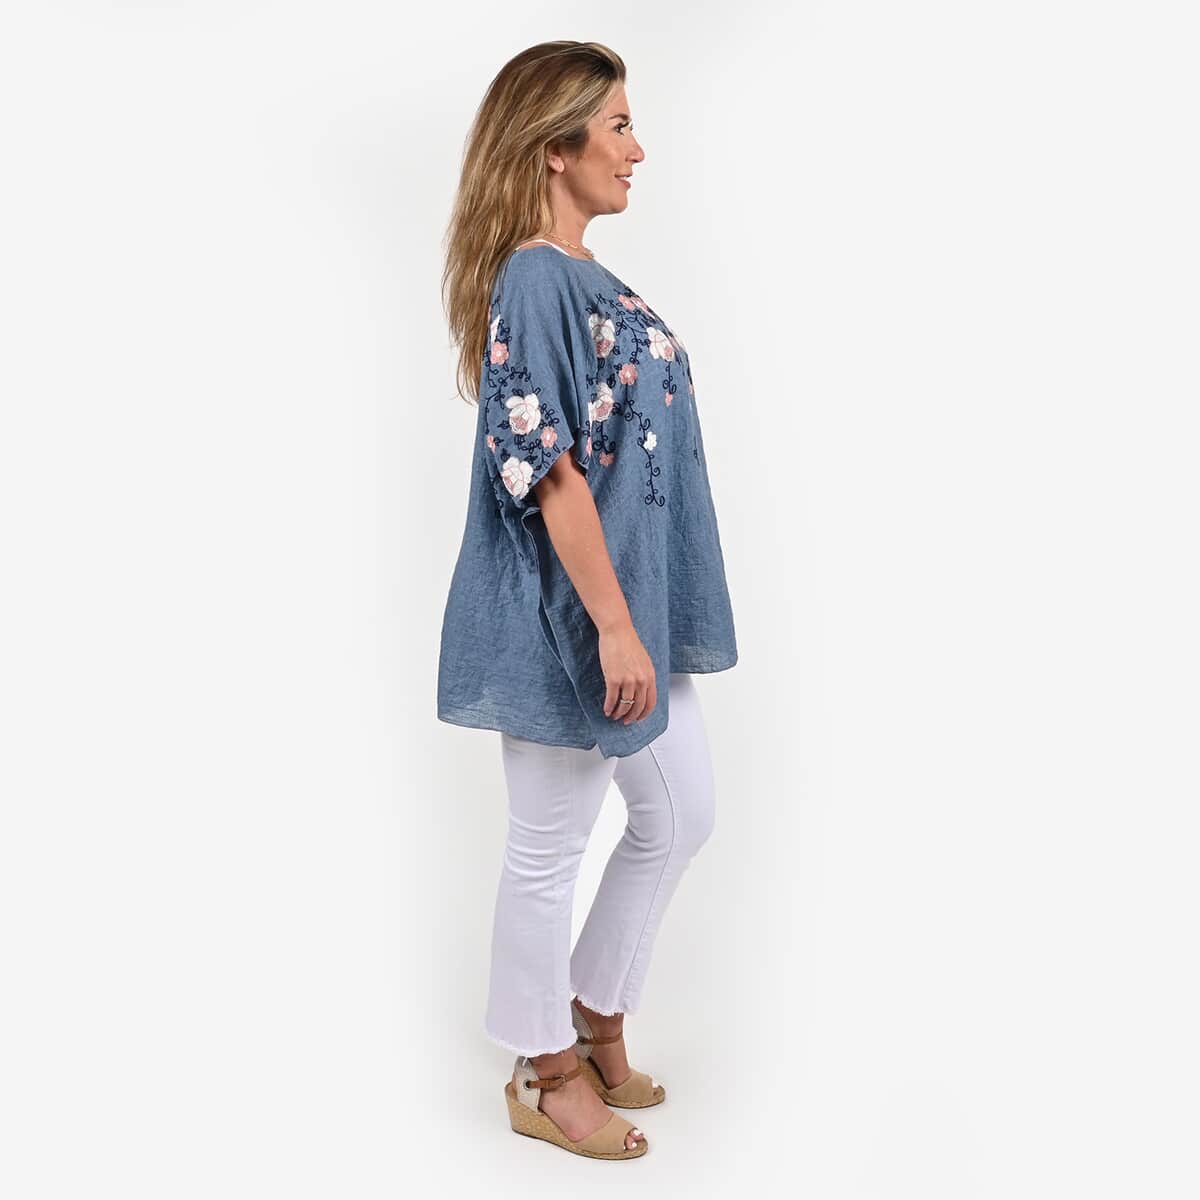 Tamsy Blue Floral Embroidered Kaftan Top , Women's Top , Floral Top , Going Out Tops , Ladies Top , Blouses for Women image number 1